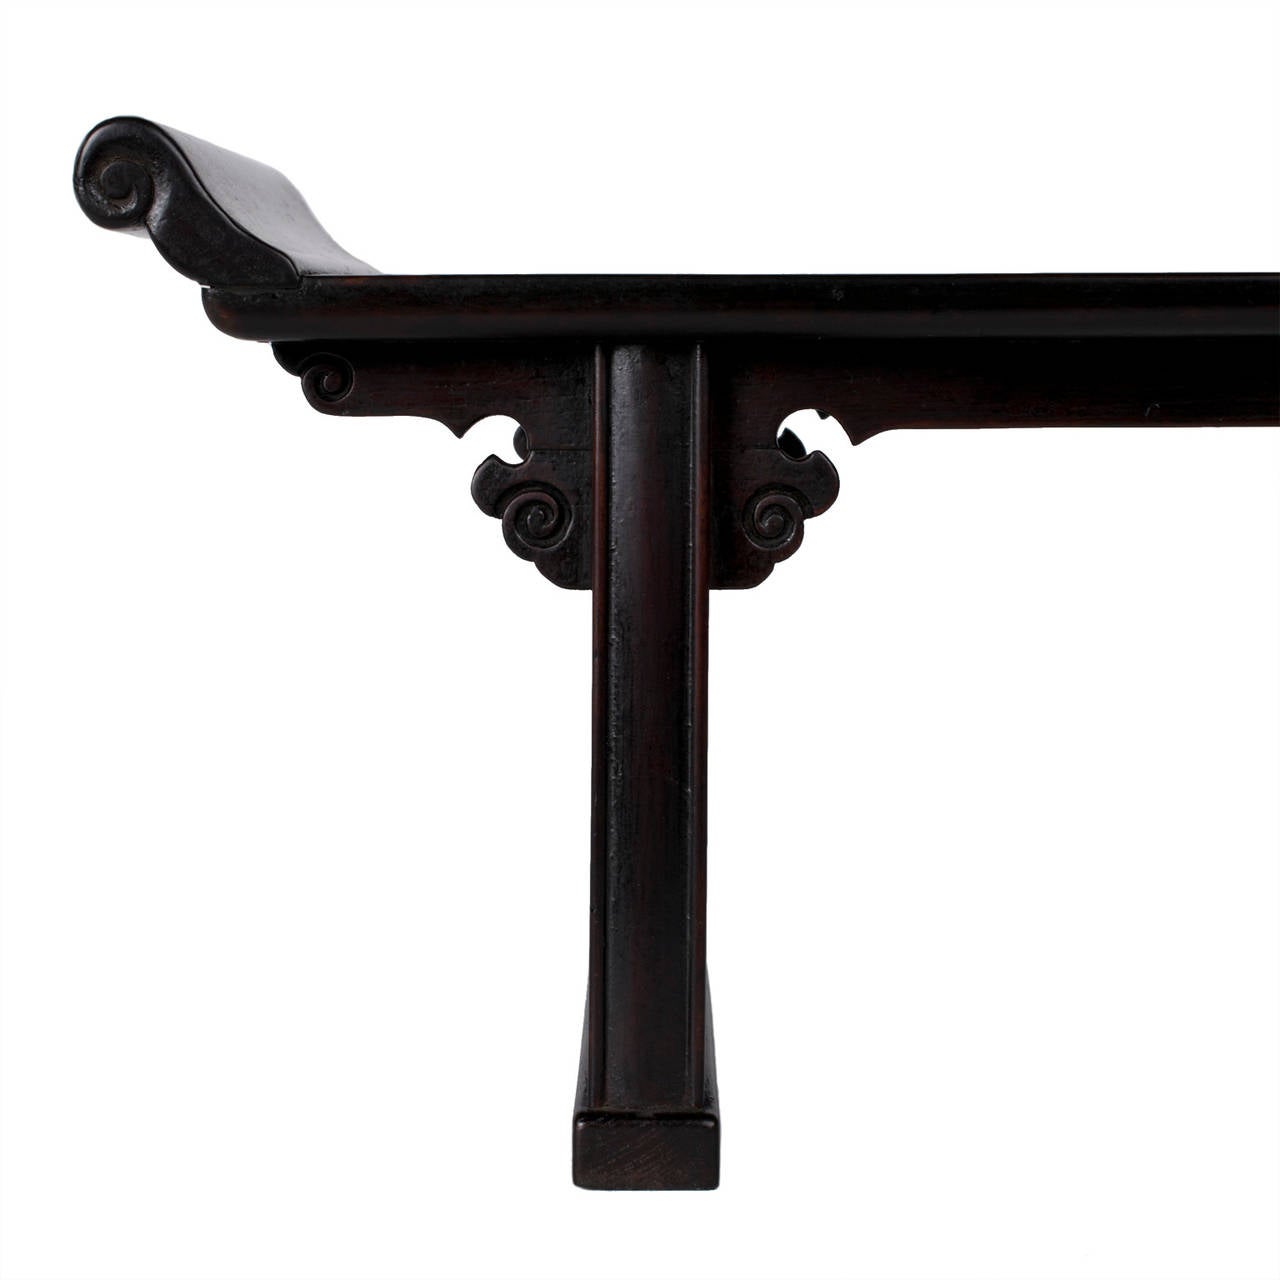 Miniature poplar black altar table with everted ends, cloud scroll spandrels and carved side panel.